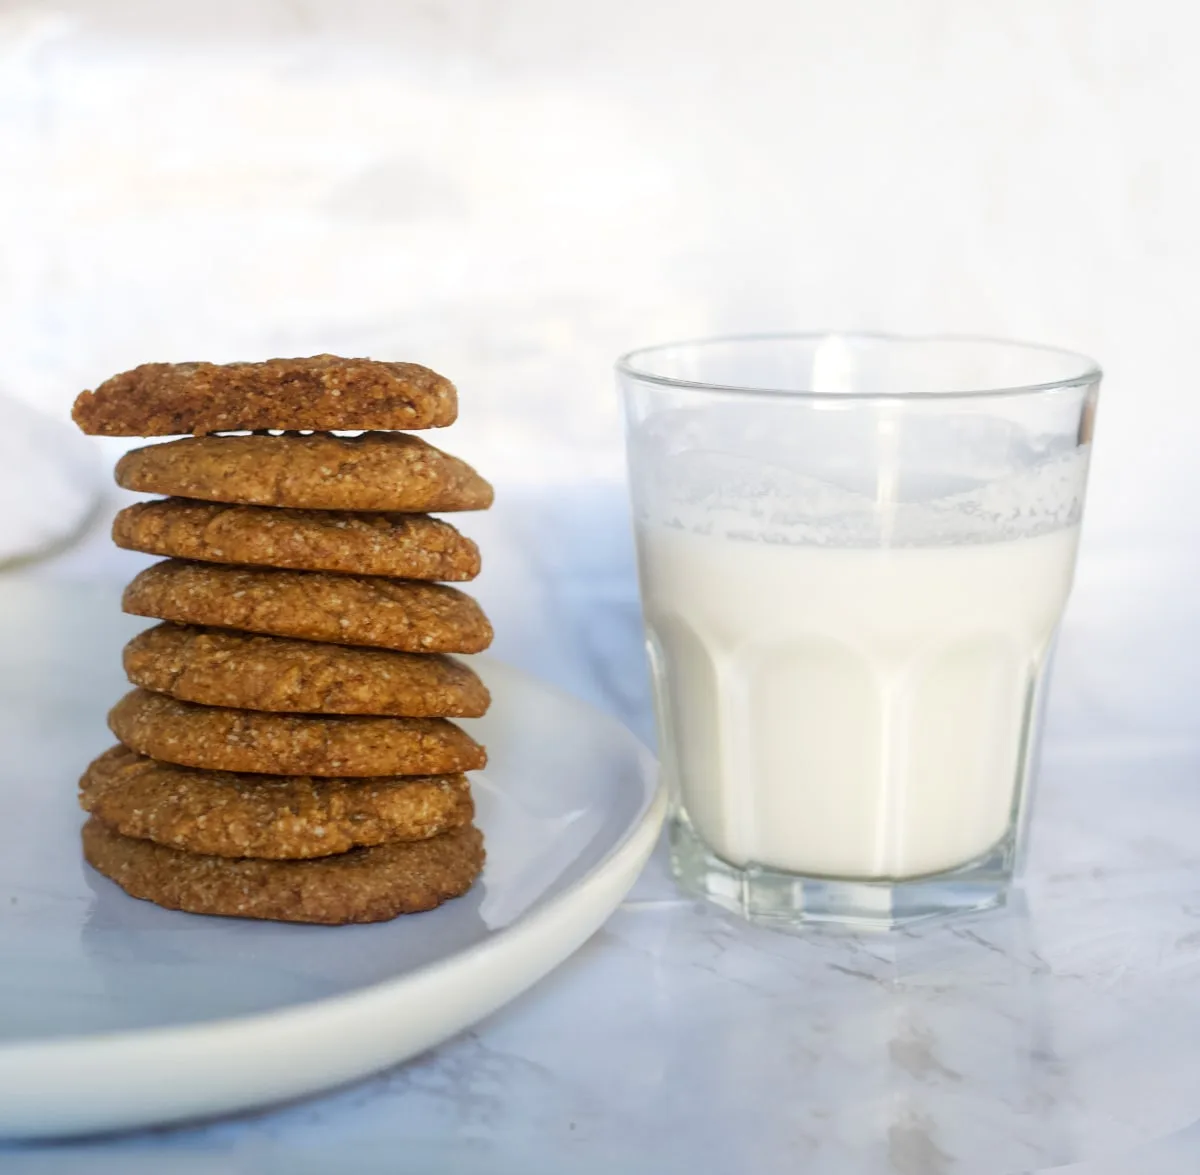 A stack of chewy peanut butter cookies and a glass of milk